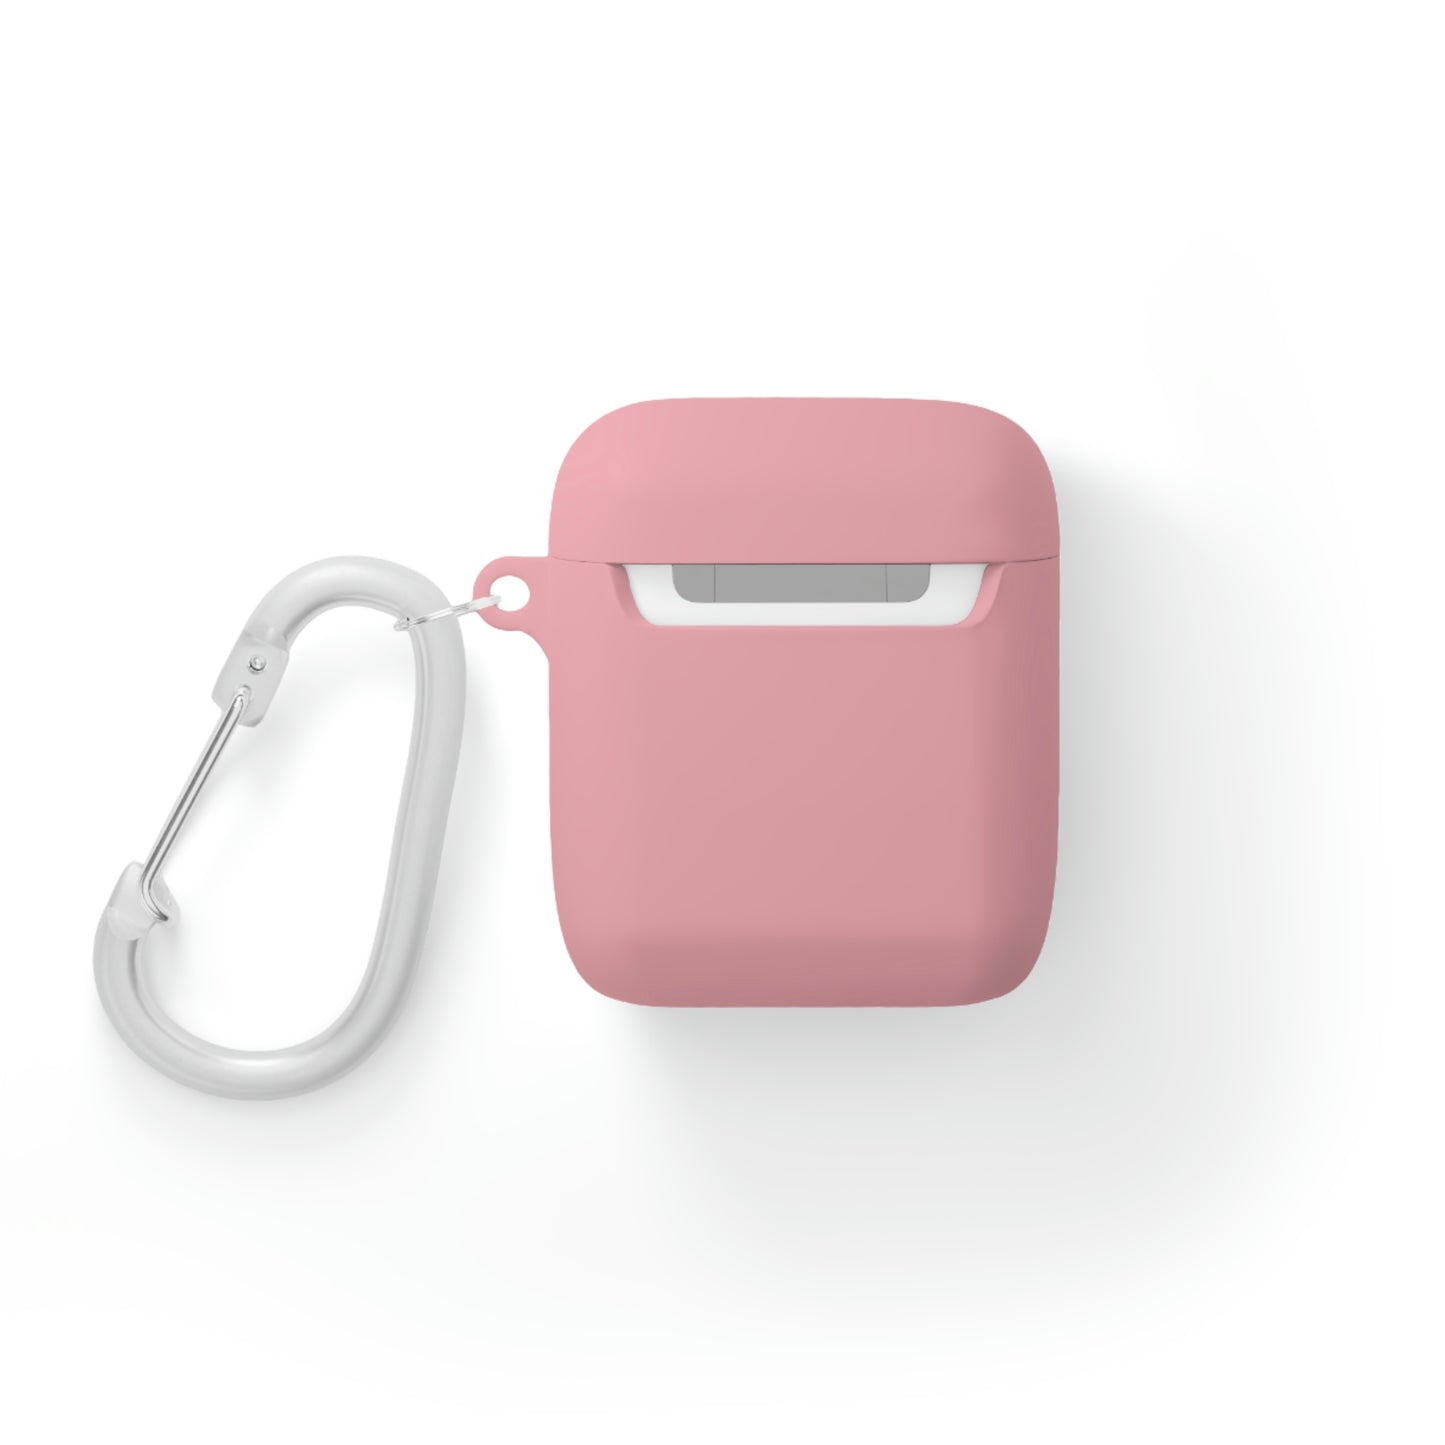 AirPods and AirPods Pro Case Cover, Lash Extension Case, Lash Extension Gift